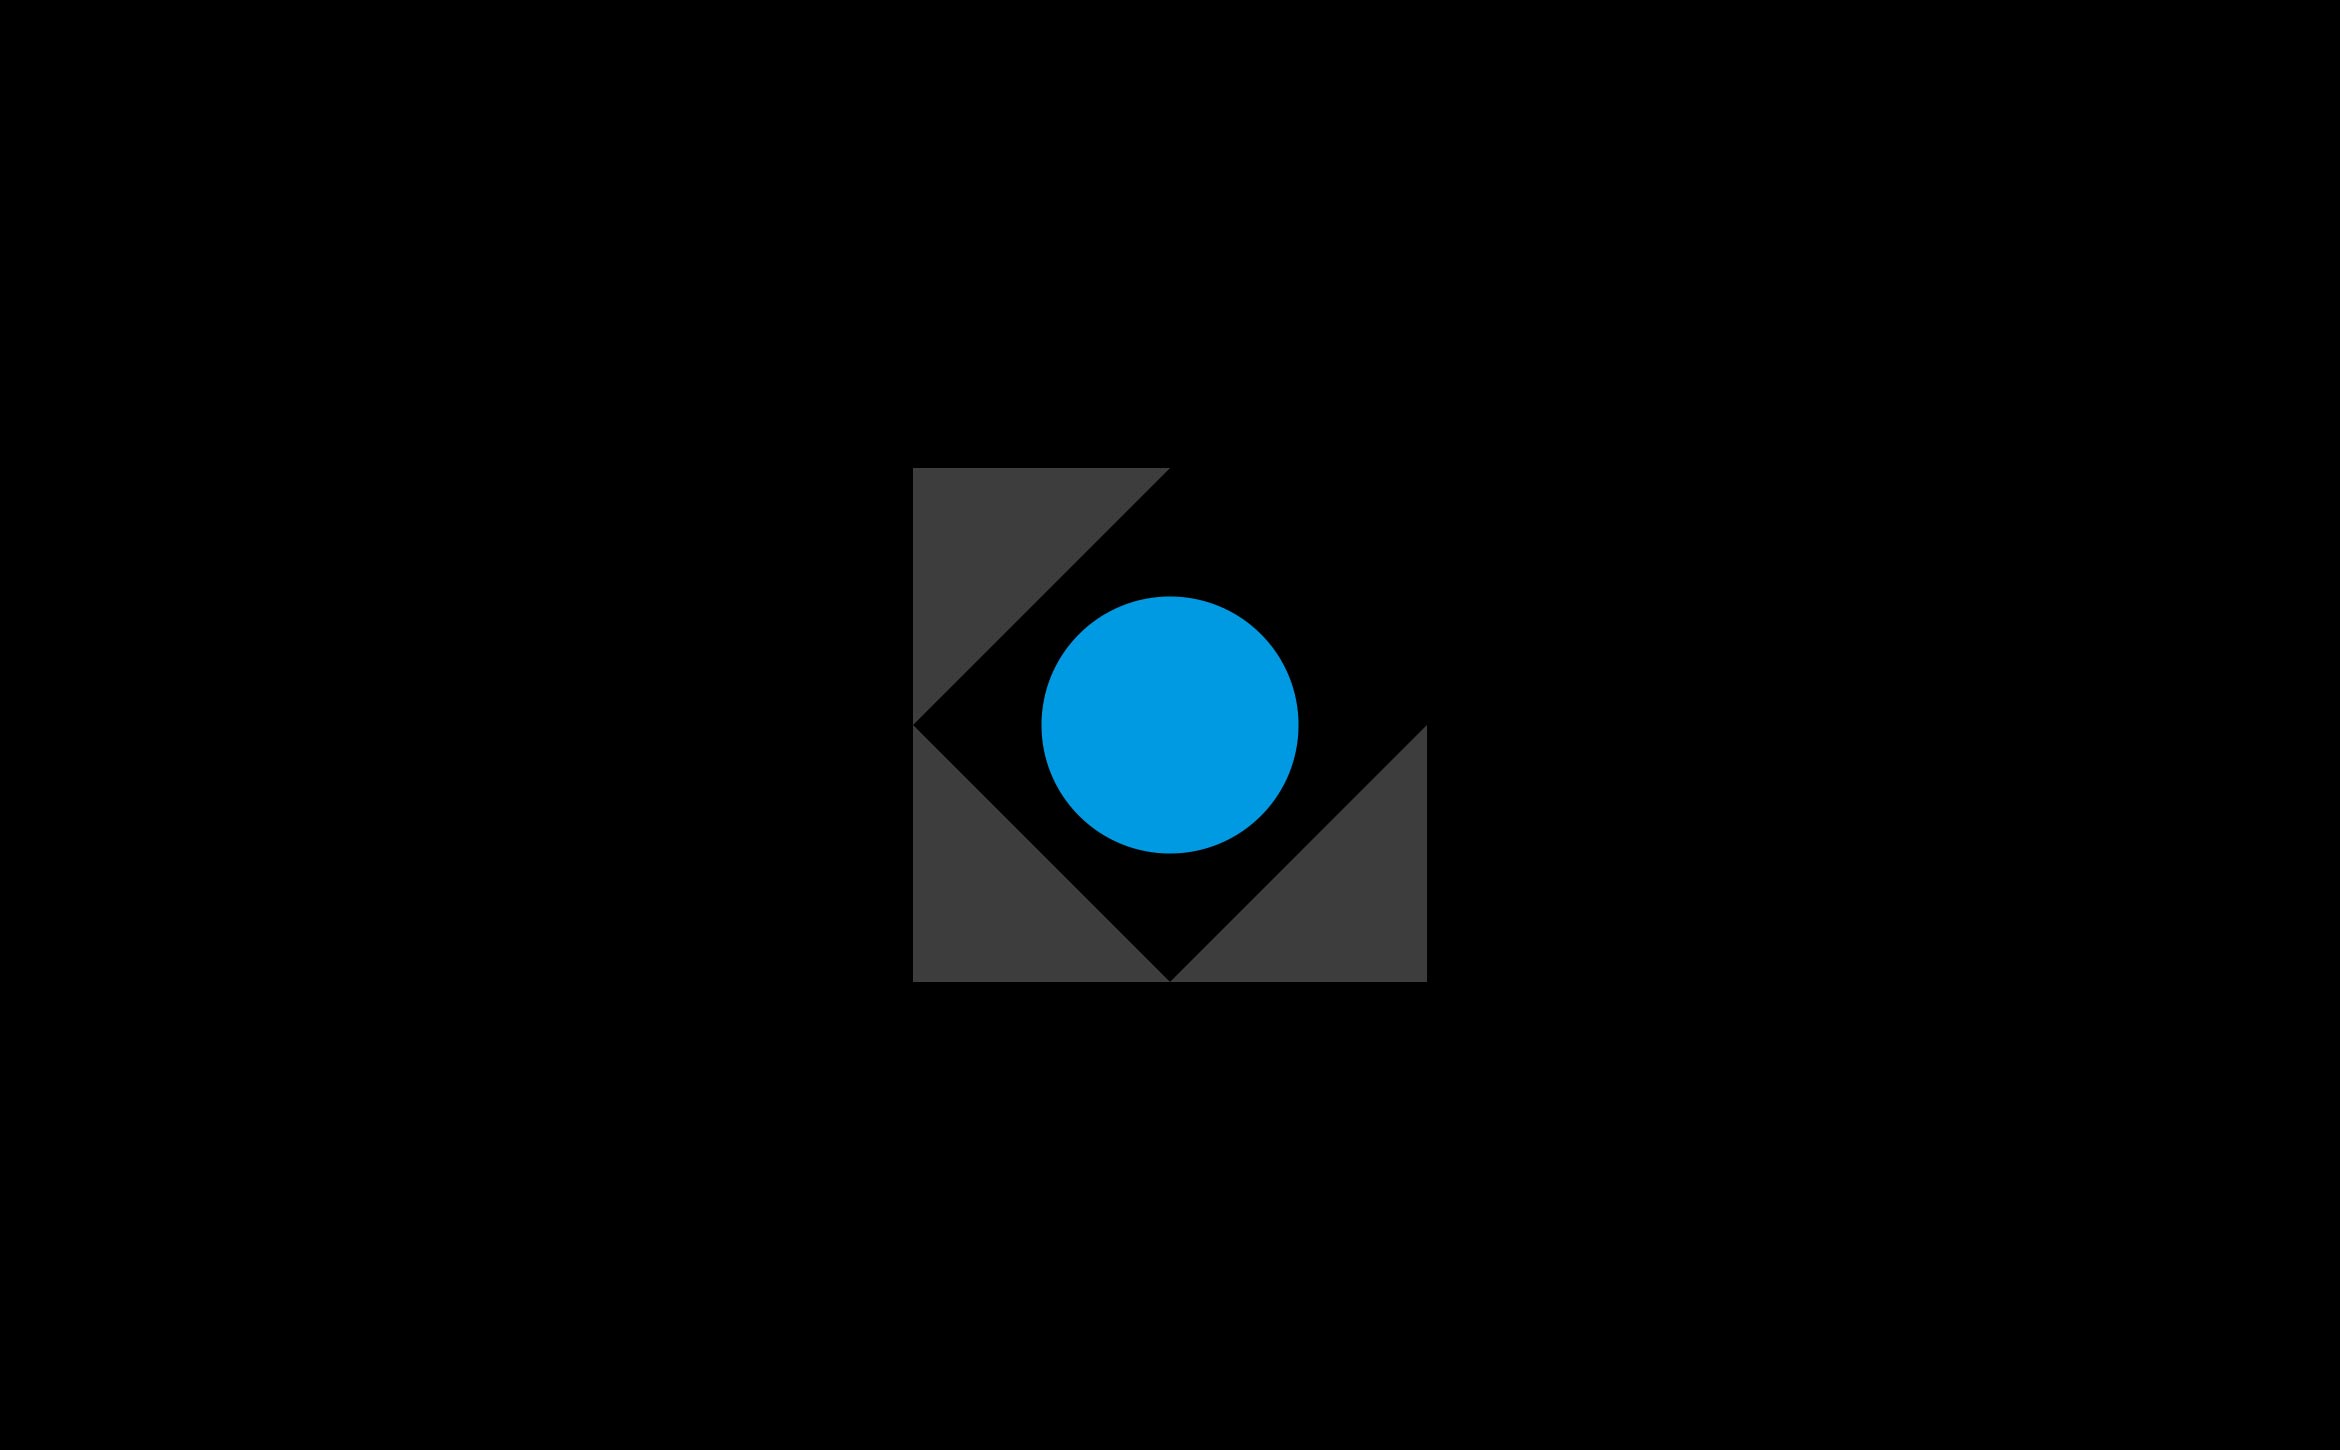 bluegiant logo composed of 3 triangles and a circle